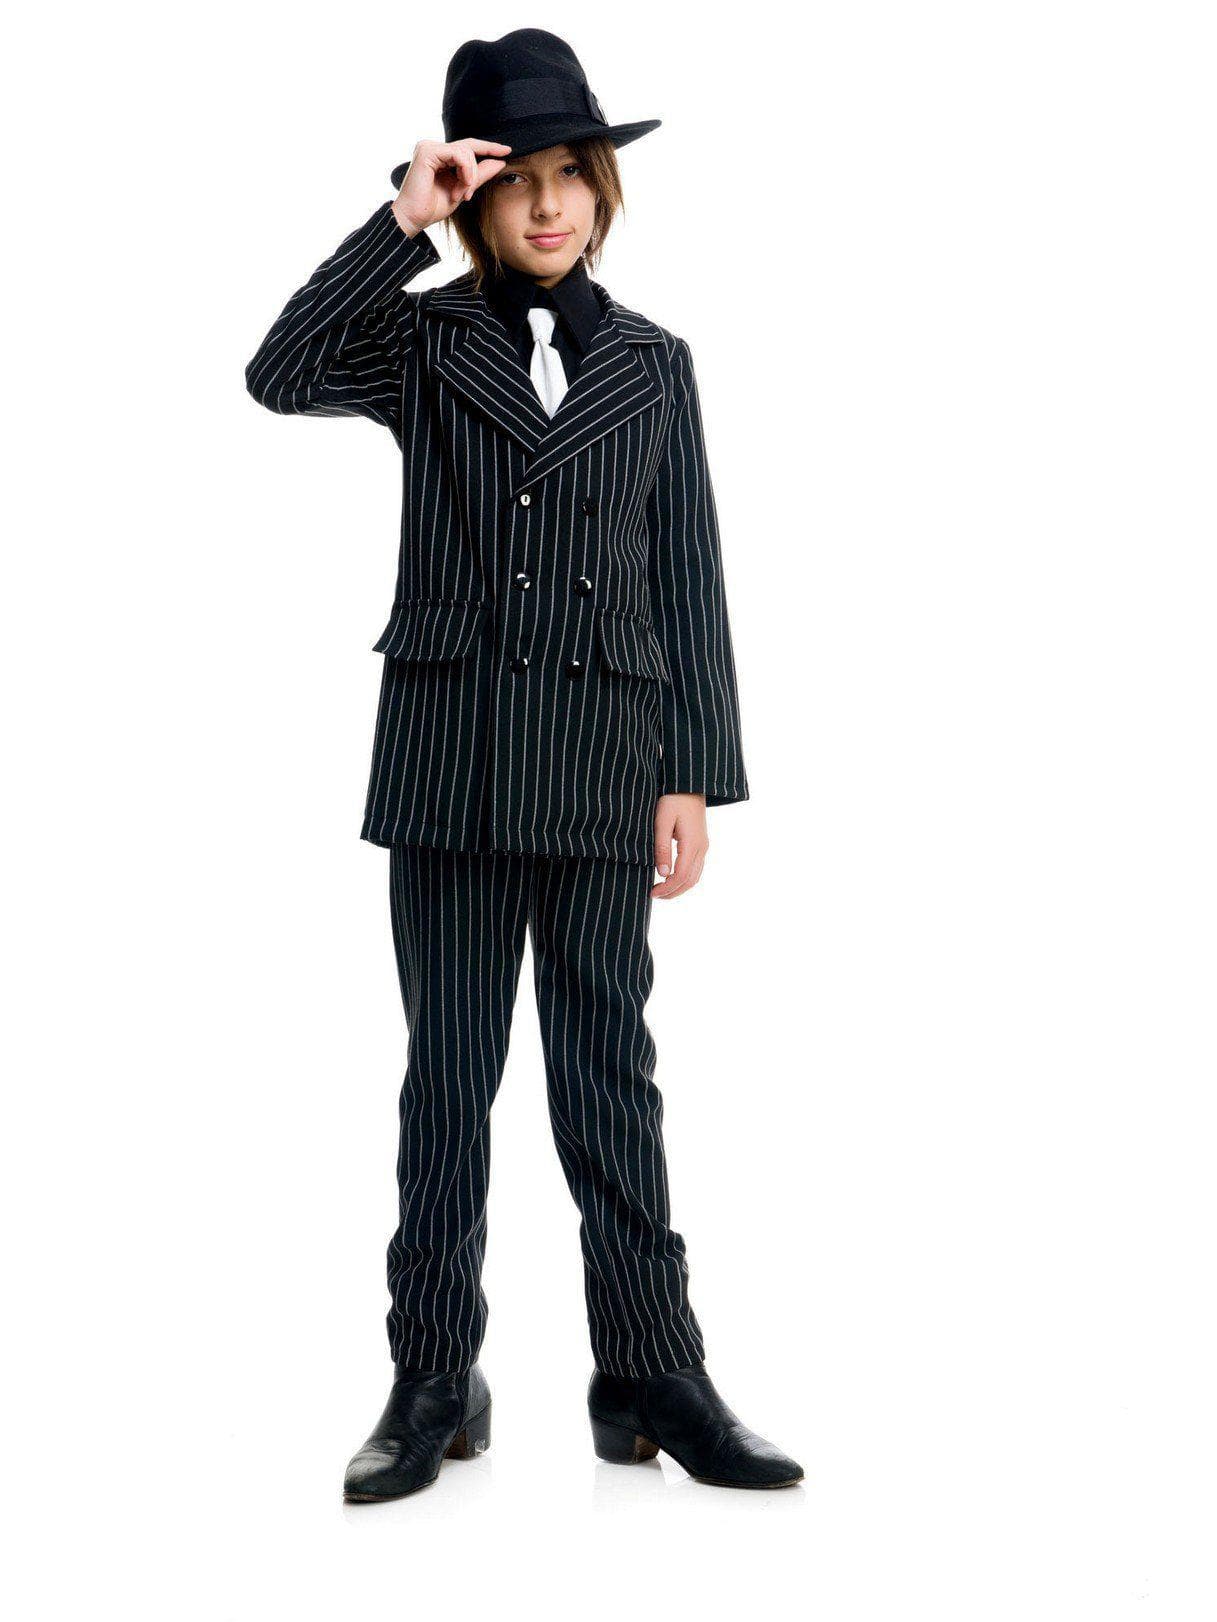 Kid's Gangster Suit Costume - costumes.com